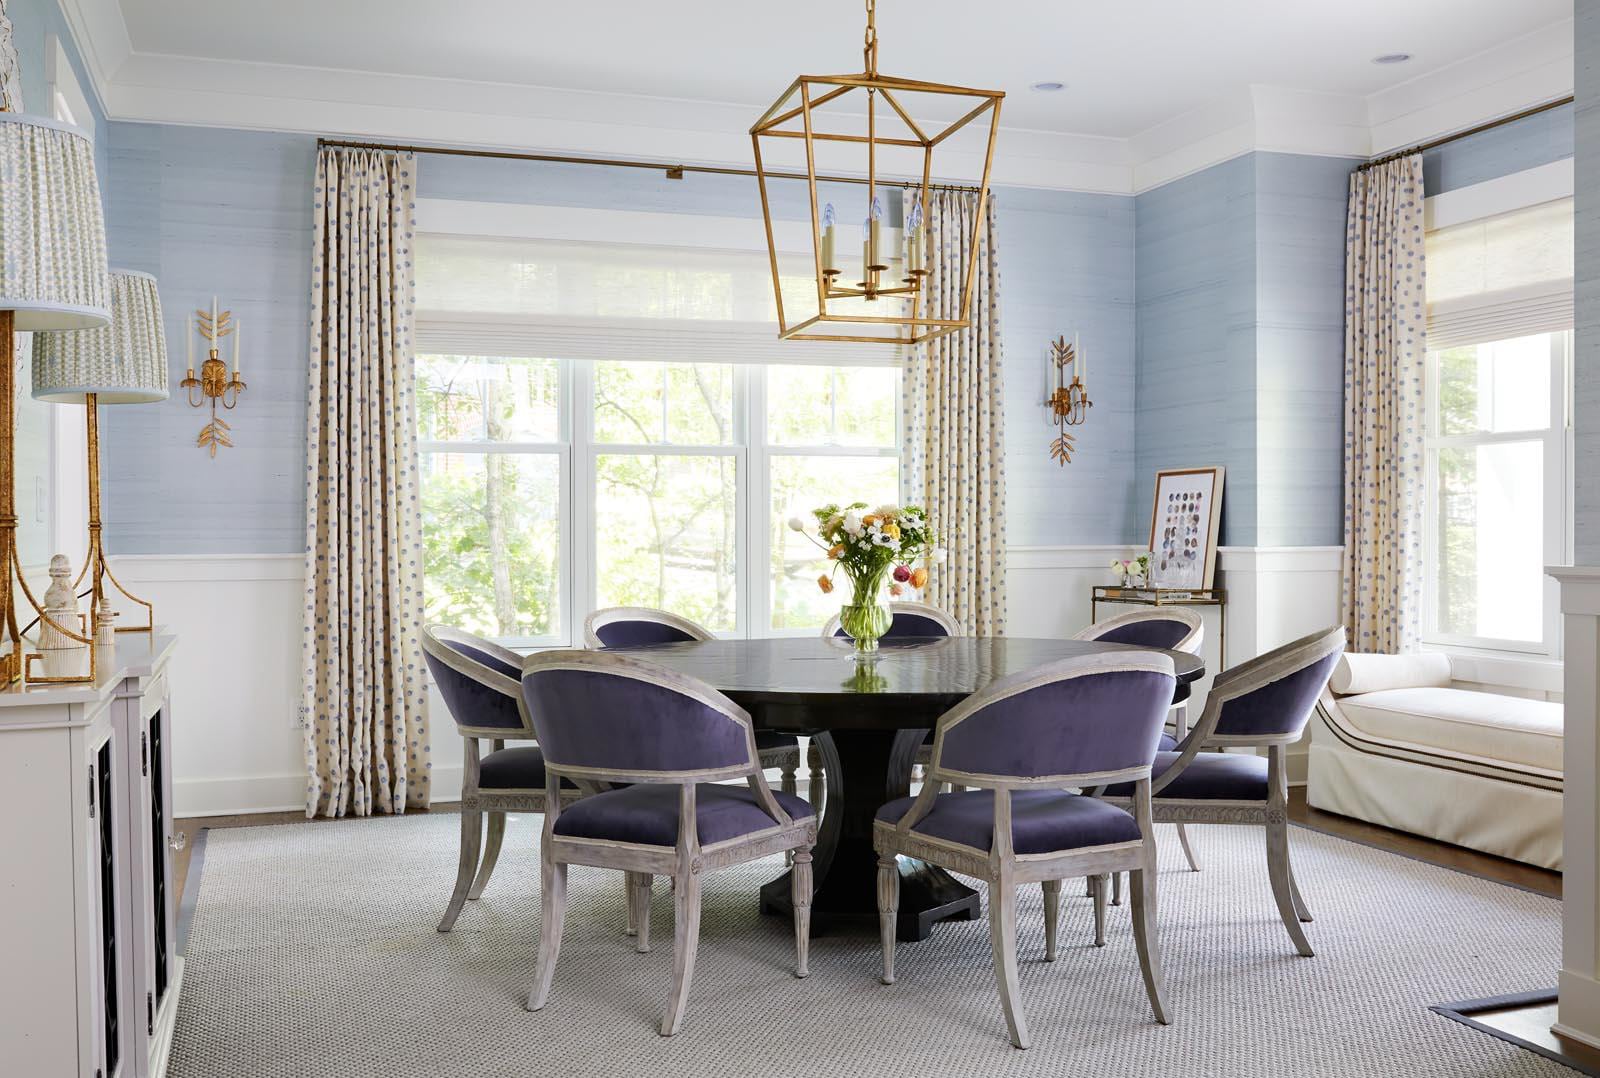 Dining room with purple chairs and blue walls